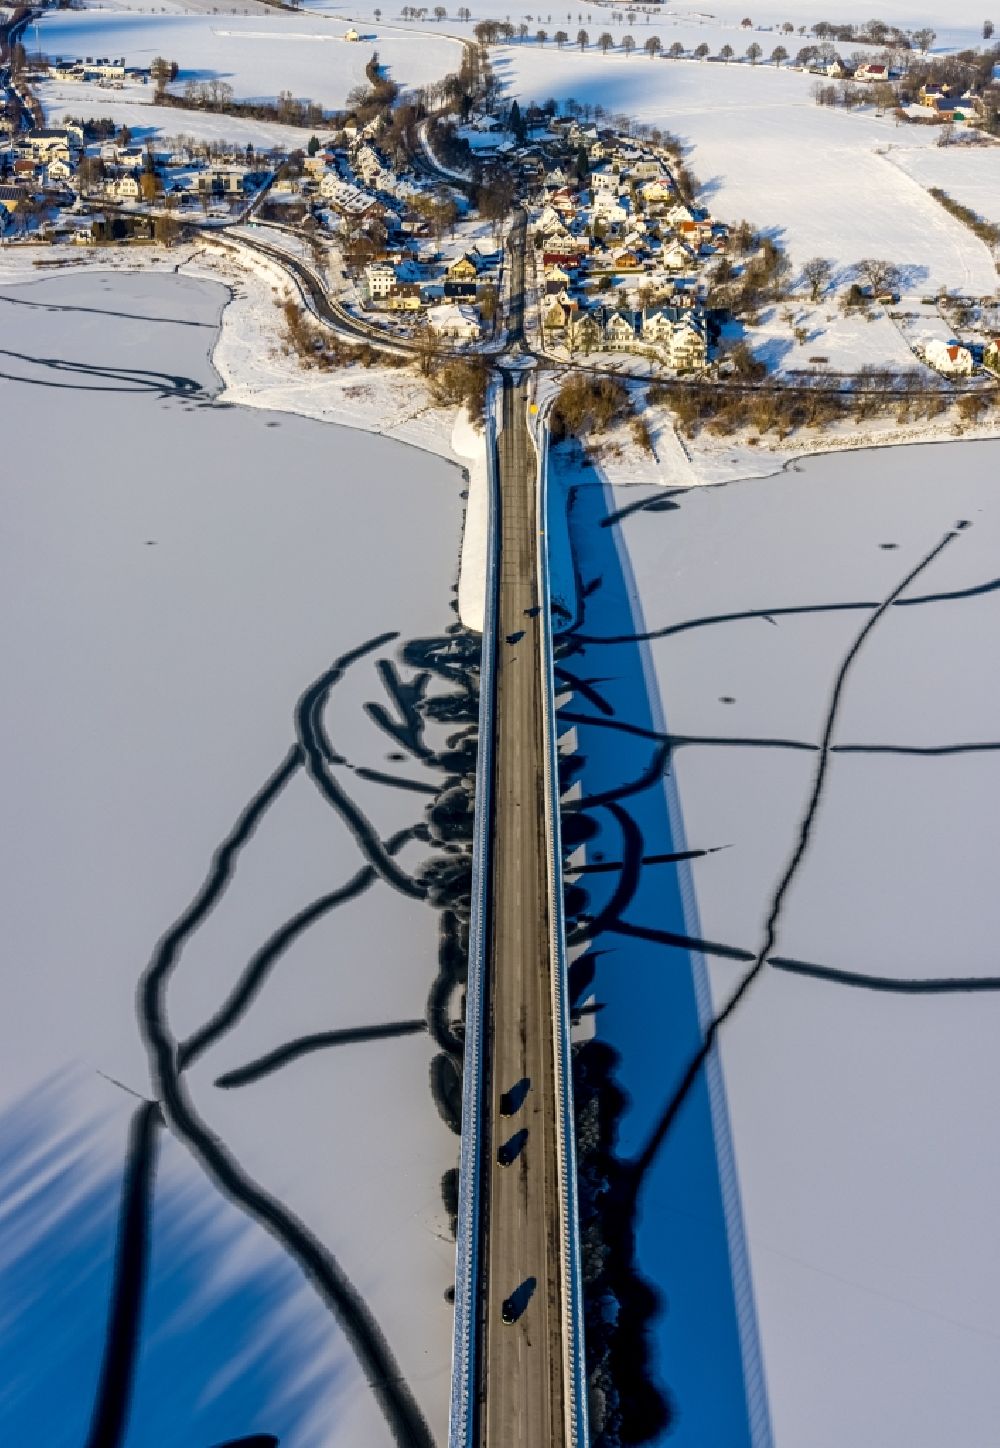 Möhnesee from above - Wintry snowy river - bridge construction der Delecker Bruecke along the Arnsberger Strasse in Moehnesee in the state North Rhine-Westphalia, Germany